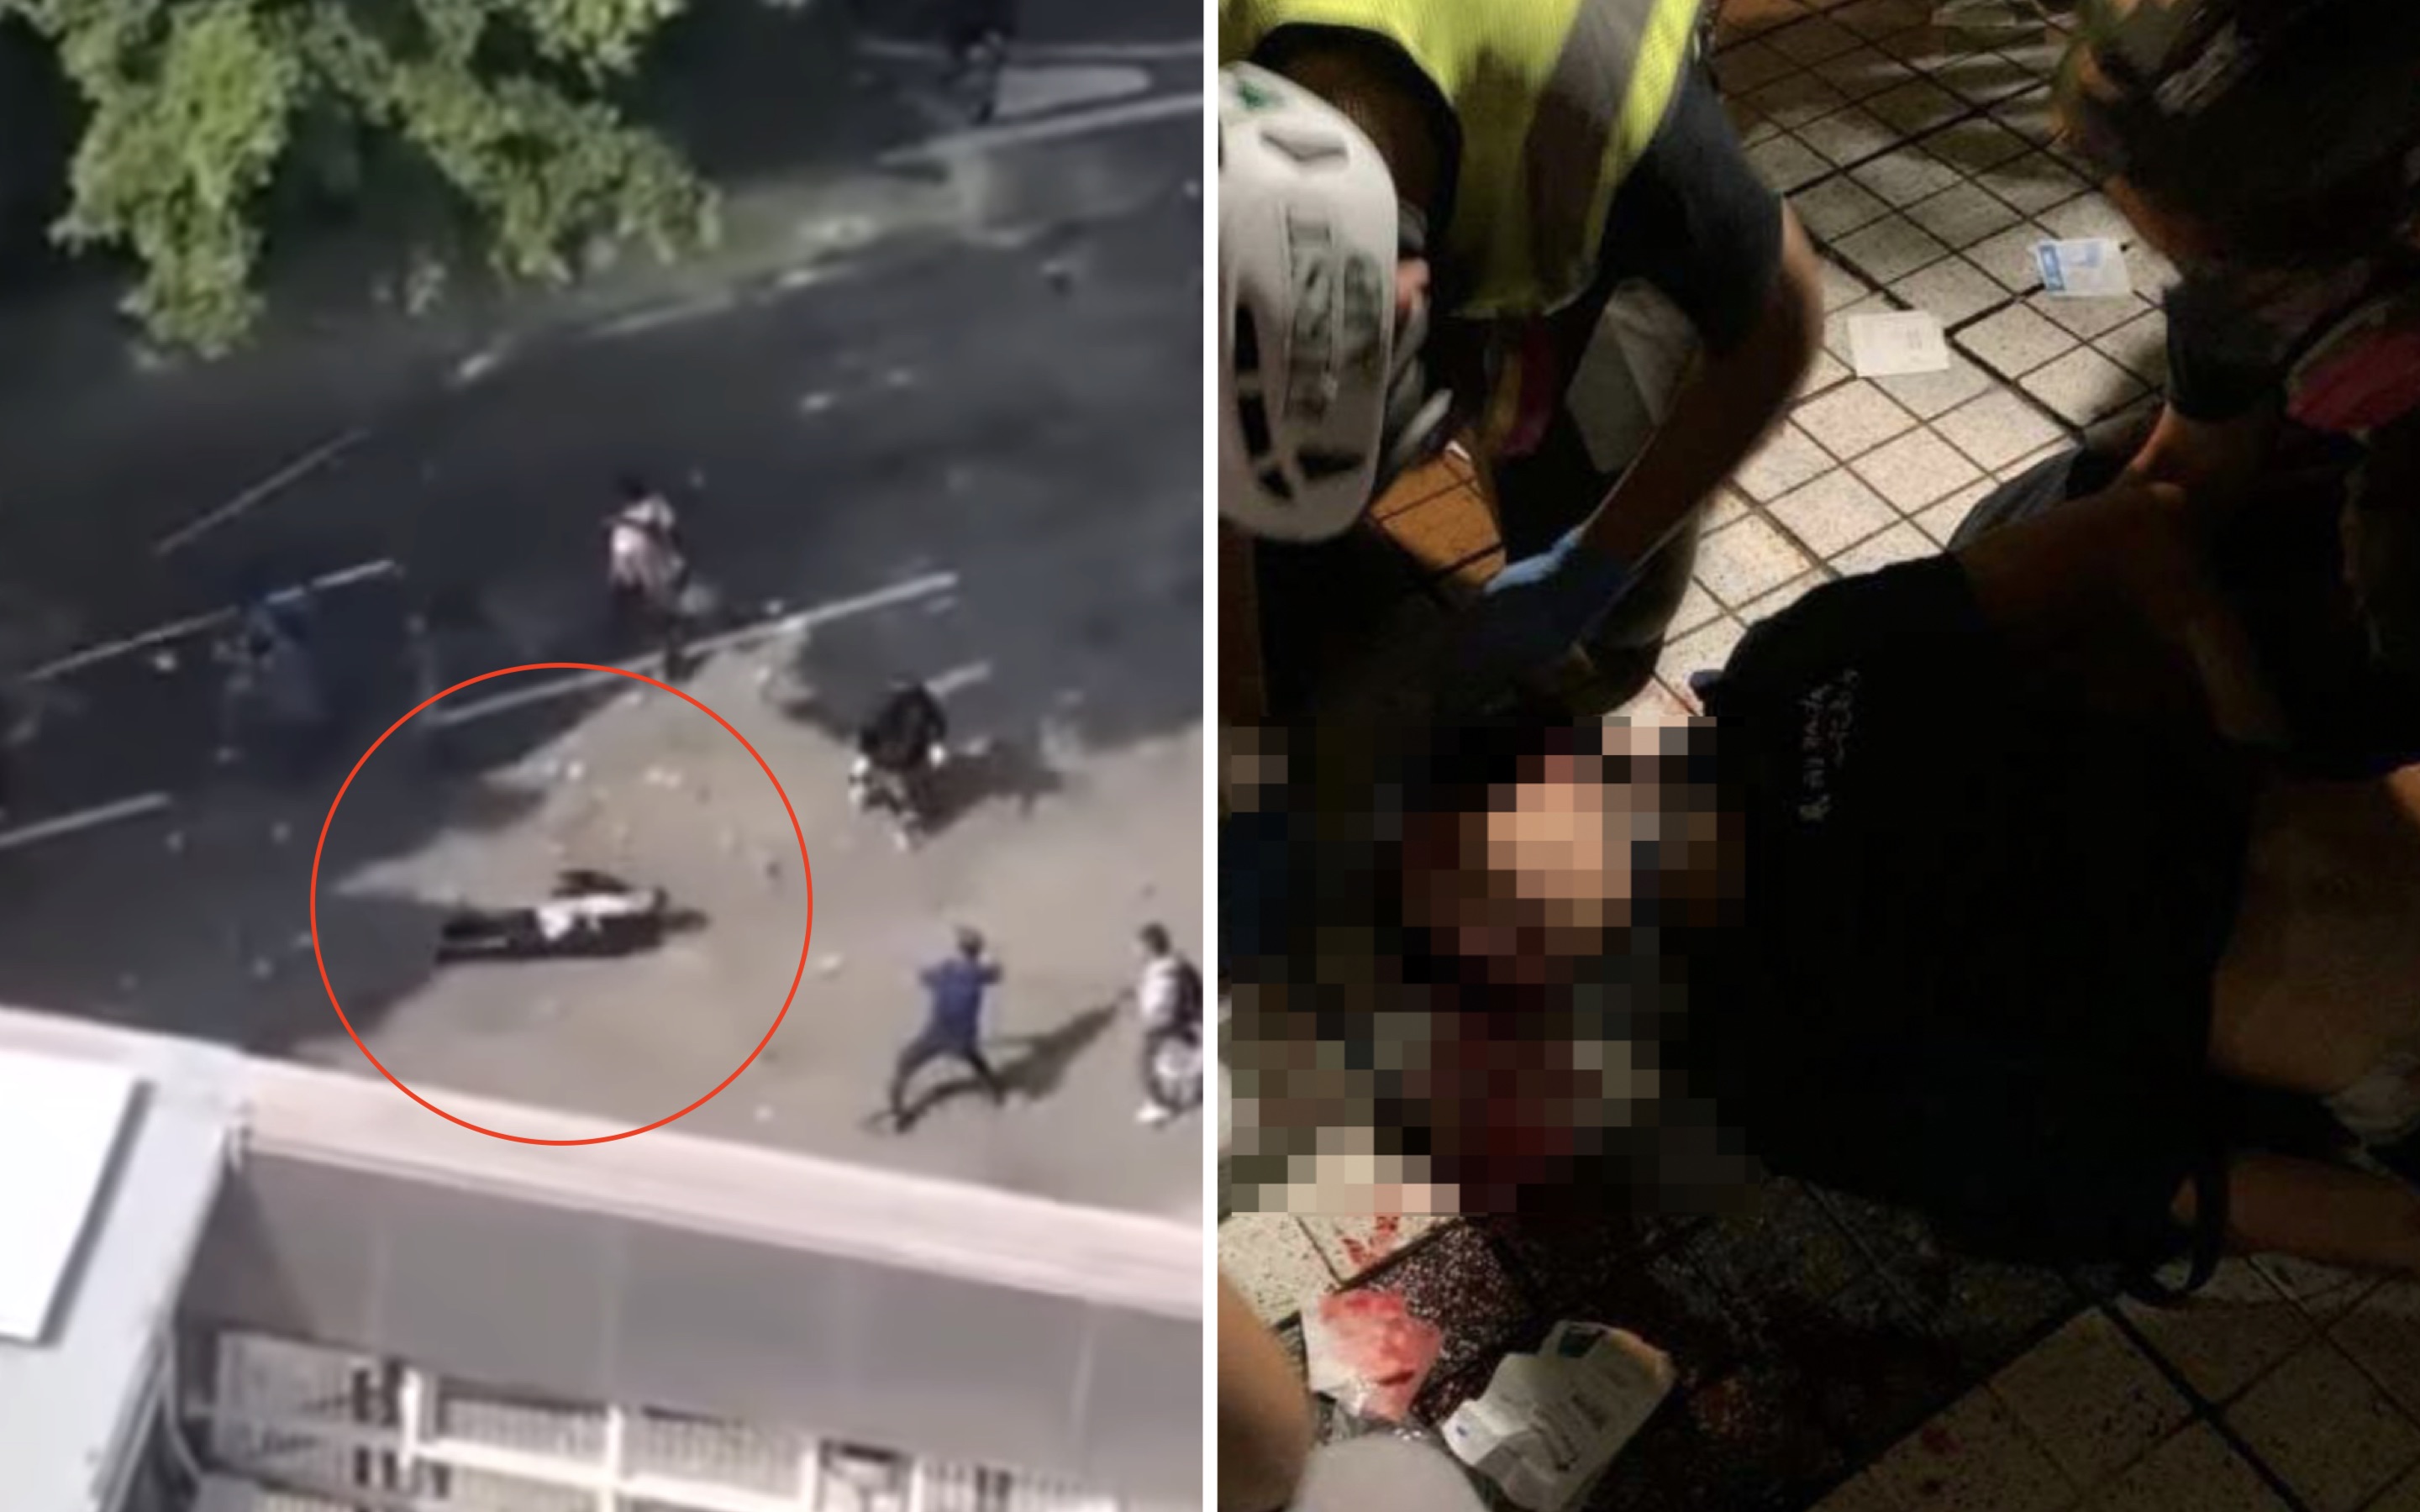 (Left) an elderly man lies on the floor after getting hit on the head by a hard object. (Right) a 15-year-old boy is struck on the head by a tear gas canister. Screengrabs and photos via YouTube and Telegram.